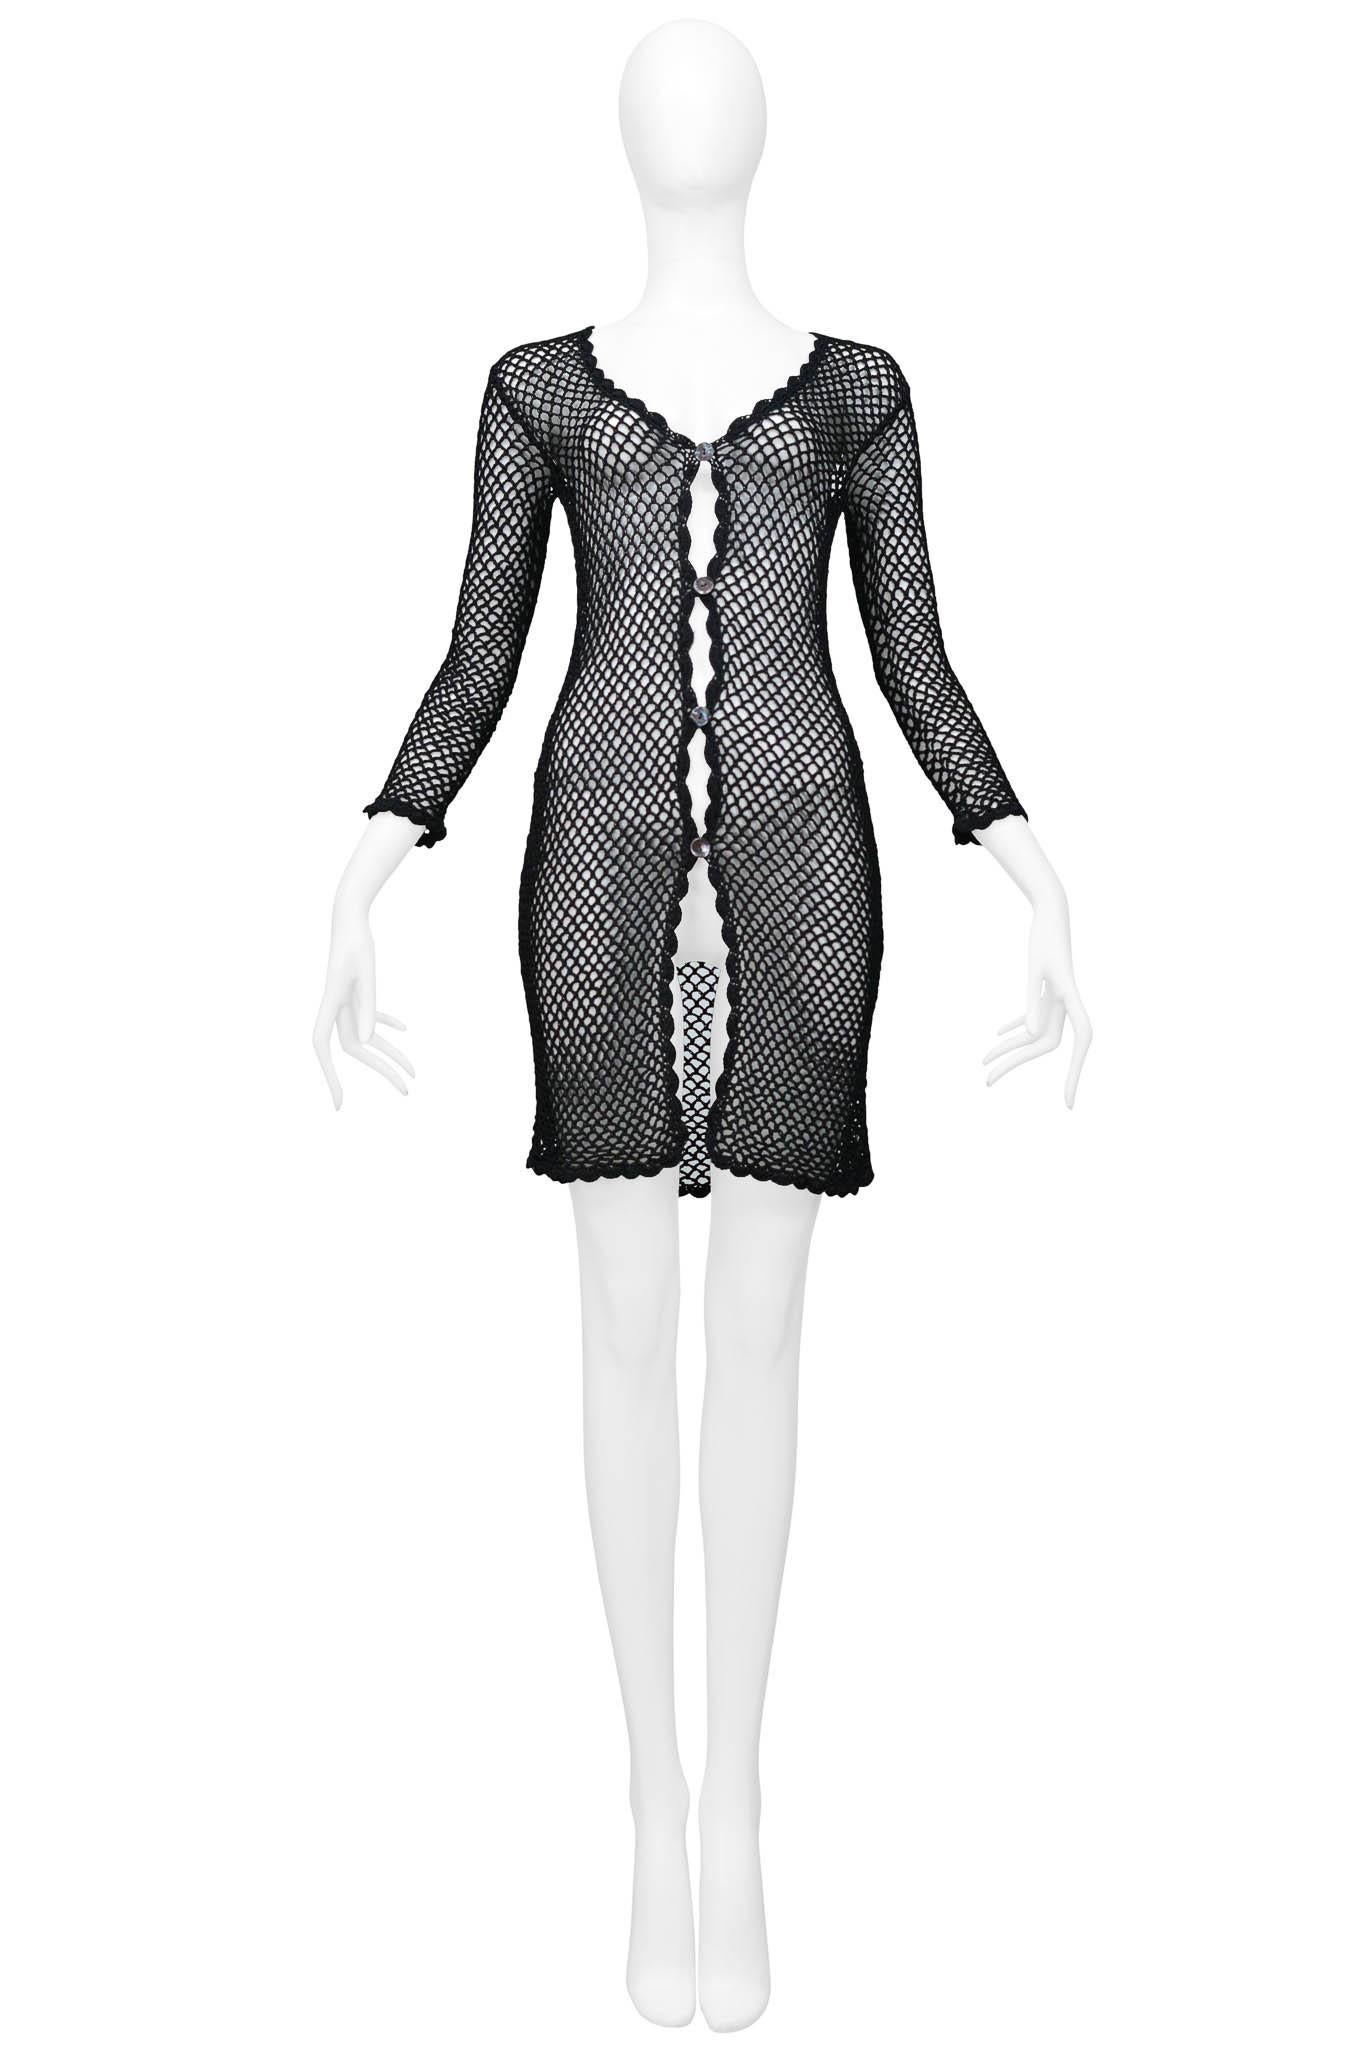 Resurrection Vintage is excited to offer a vintage Dolce & Gabbana black fishnet cardigan dress featuring a crochet fishnet weave, scalloped trim, and button closure.

Dolce & Gabbana
Size Small
Nylon
Excellent Vintage Condition 
Authenticity